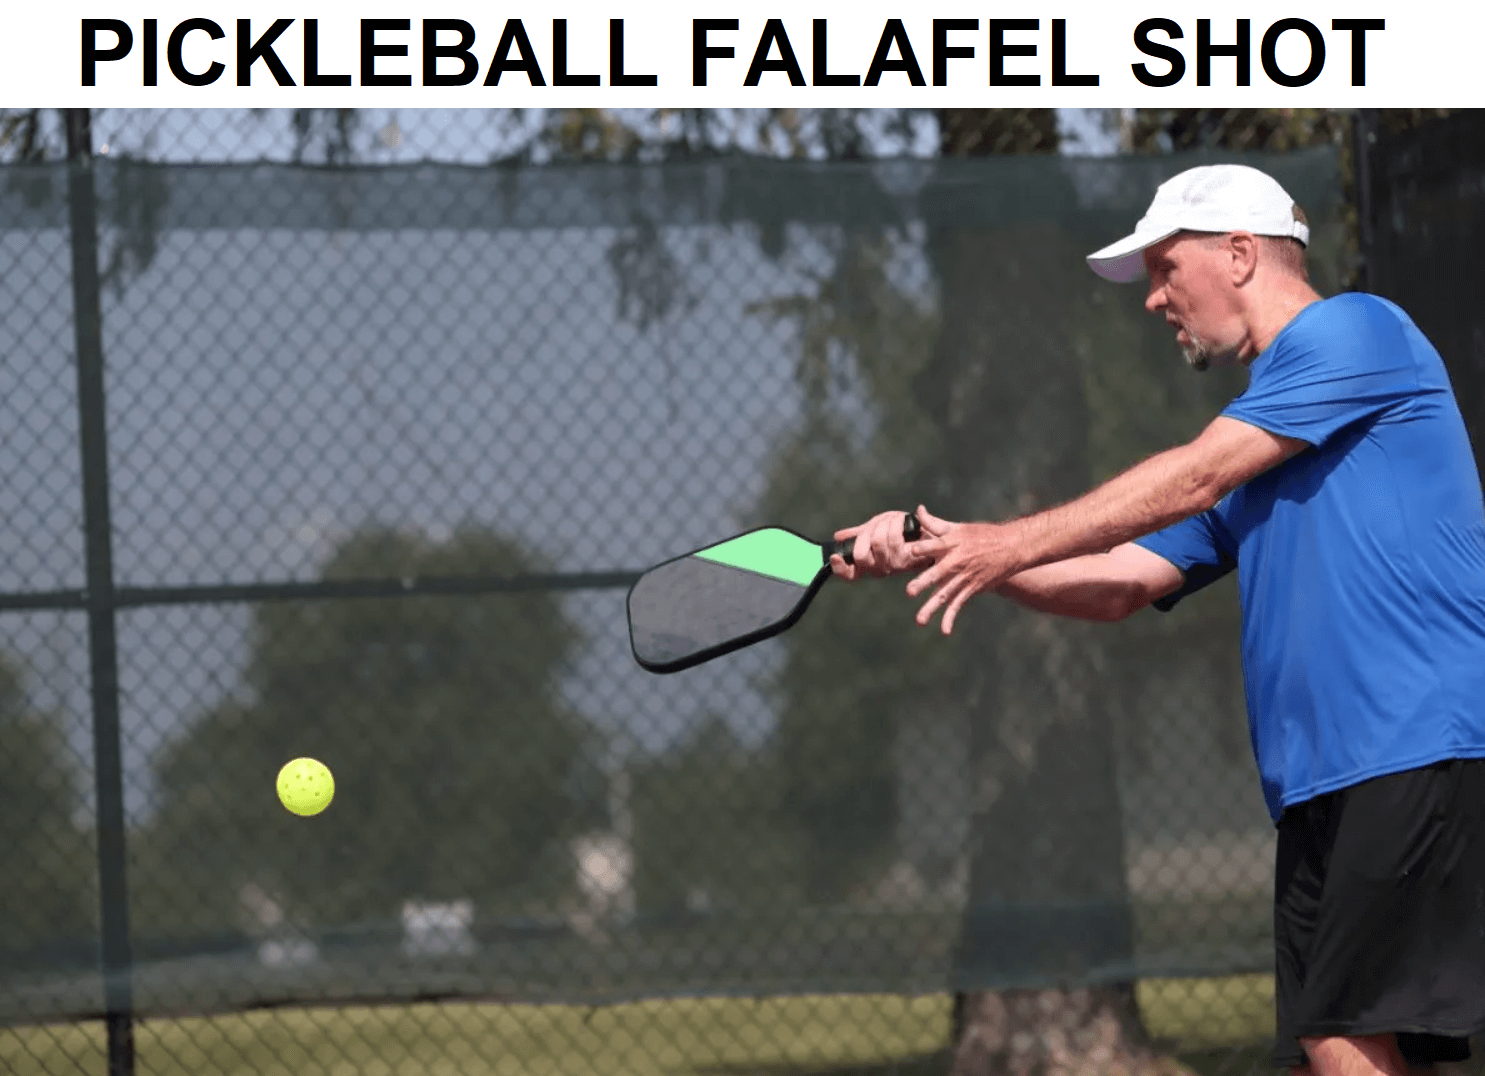 How to hit the falafel shot in pickleball?